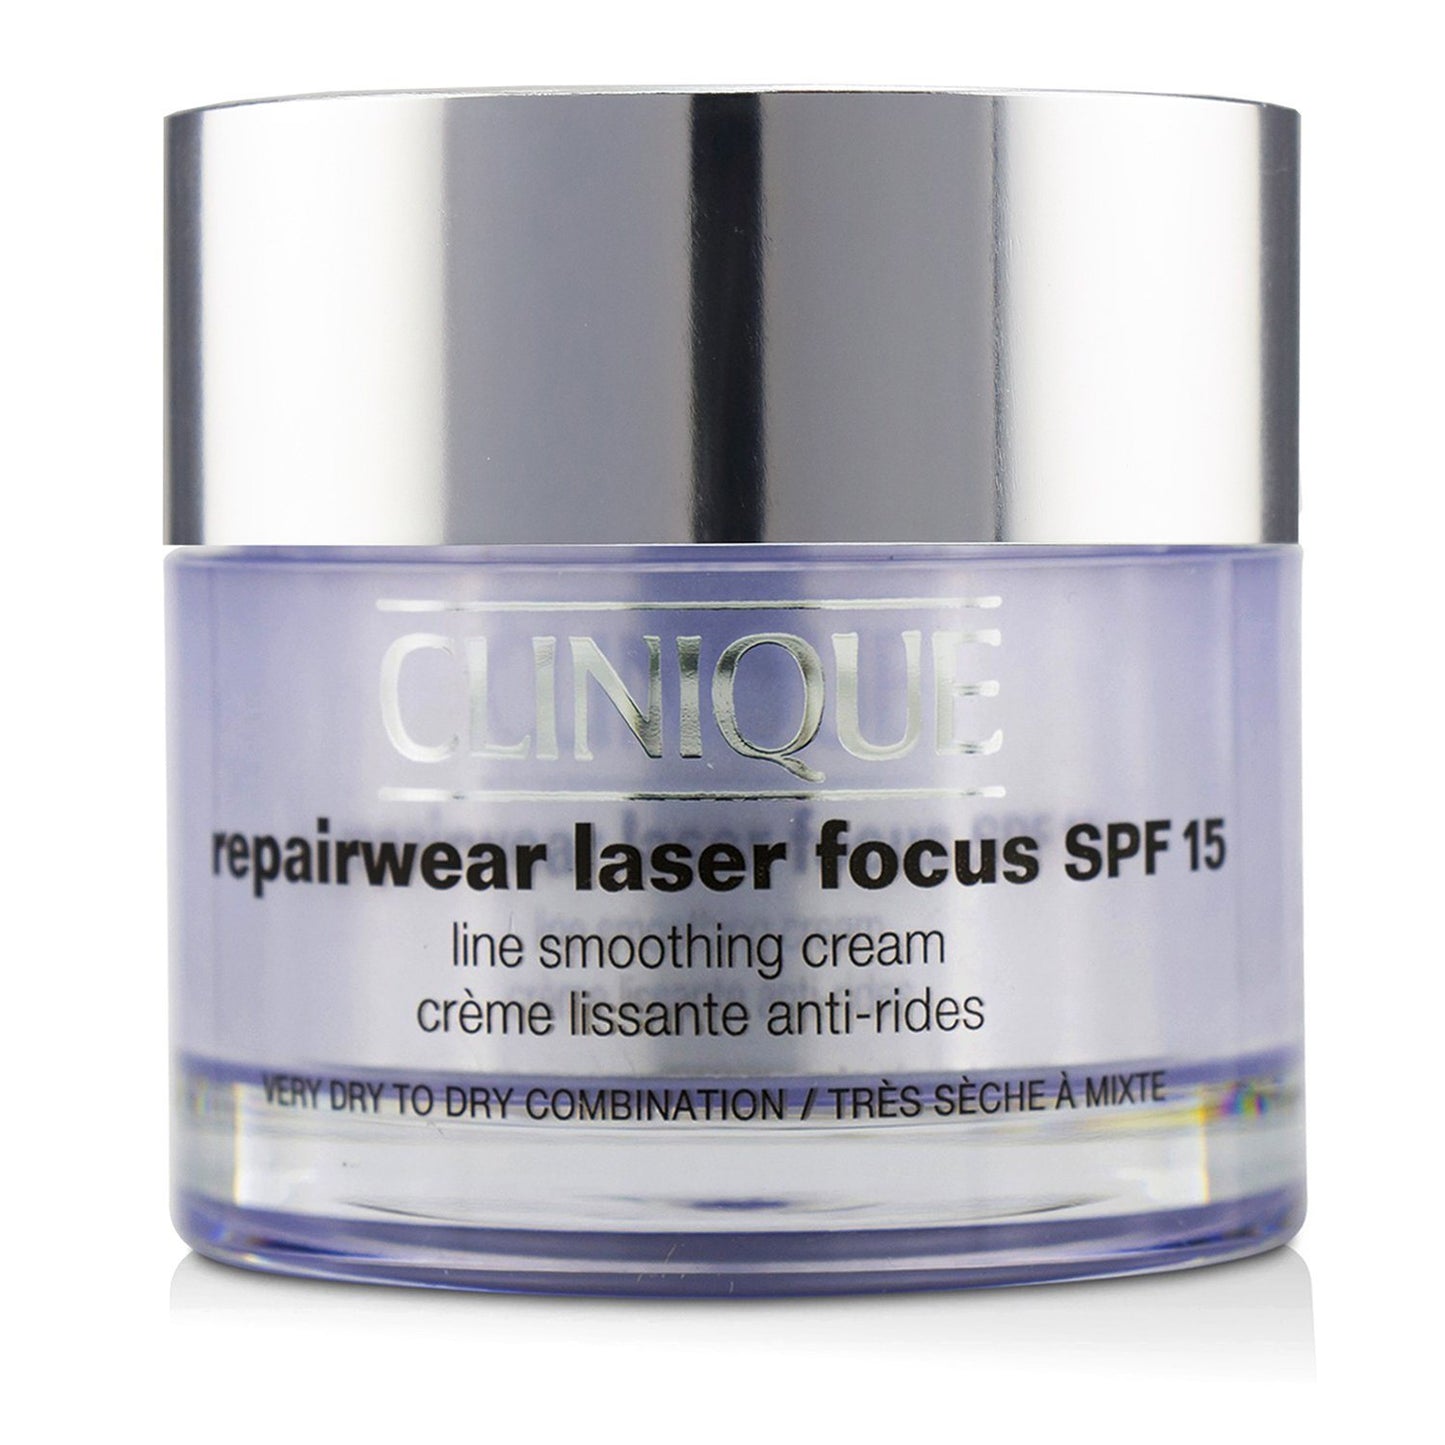 CLINIQUE - Repairwear Laser Focus Line Smoothing Cream SPF 15 - Very Dry To Dry Combination ZK50 50ml/1.7oz